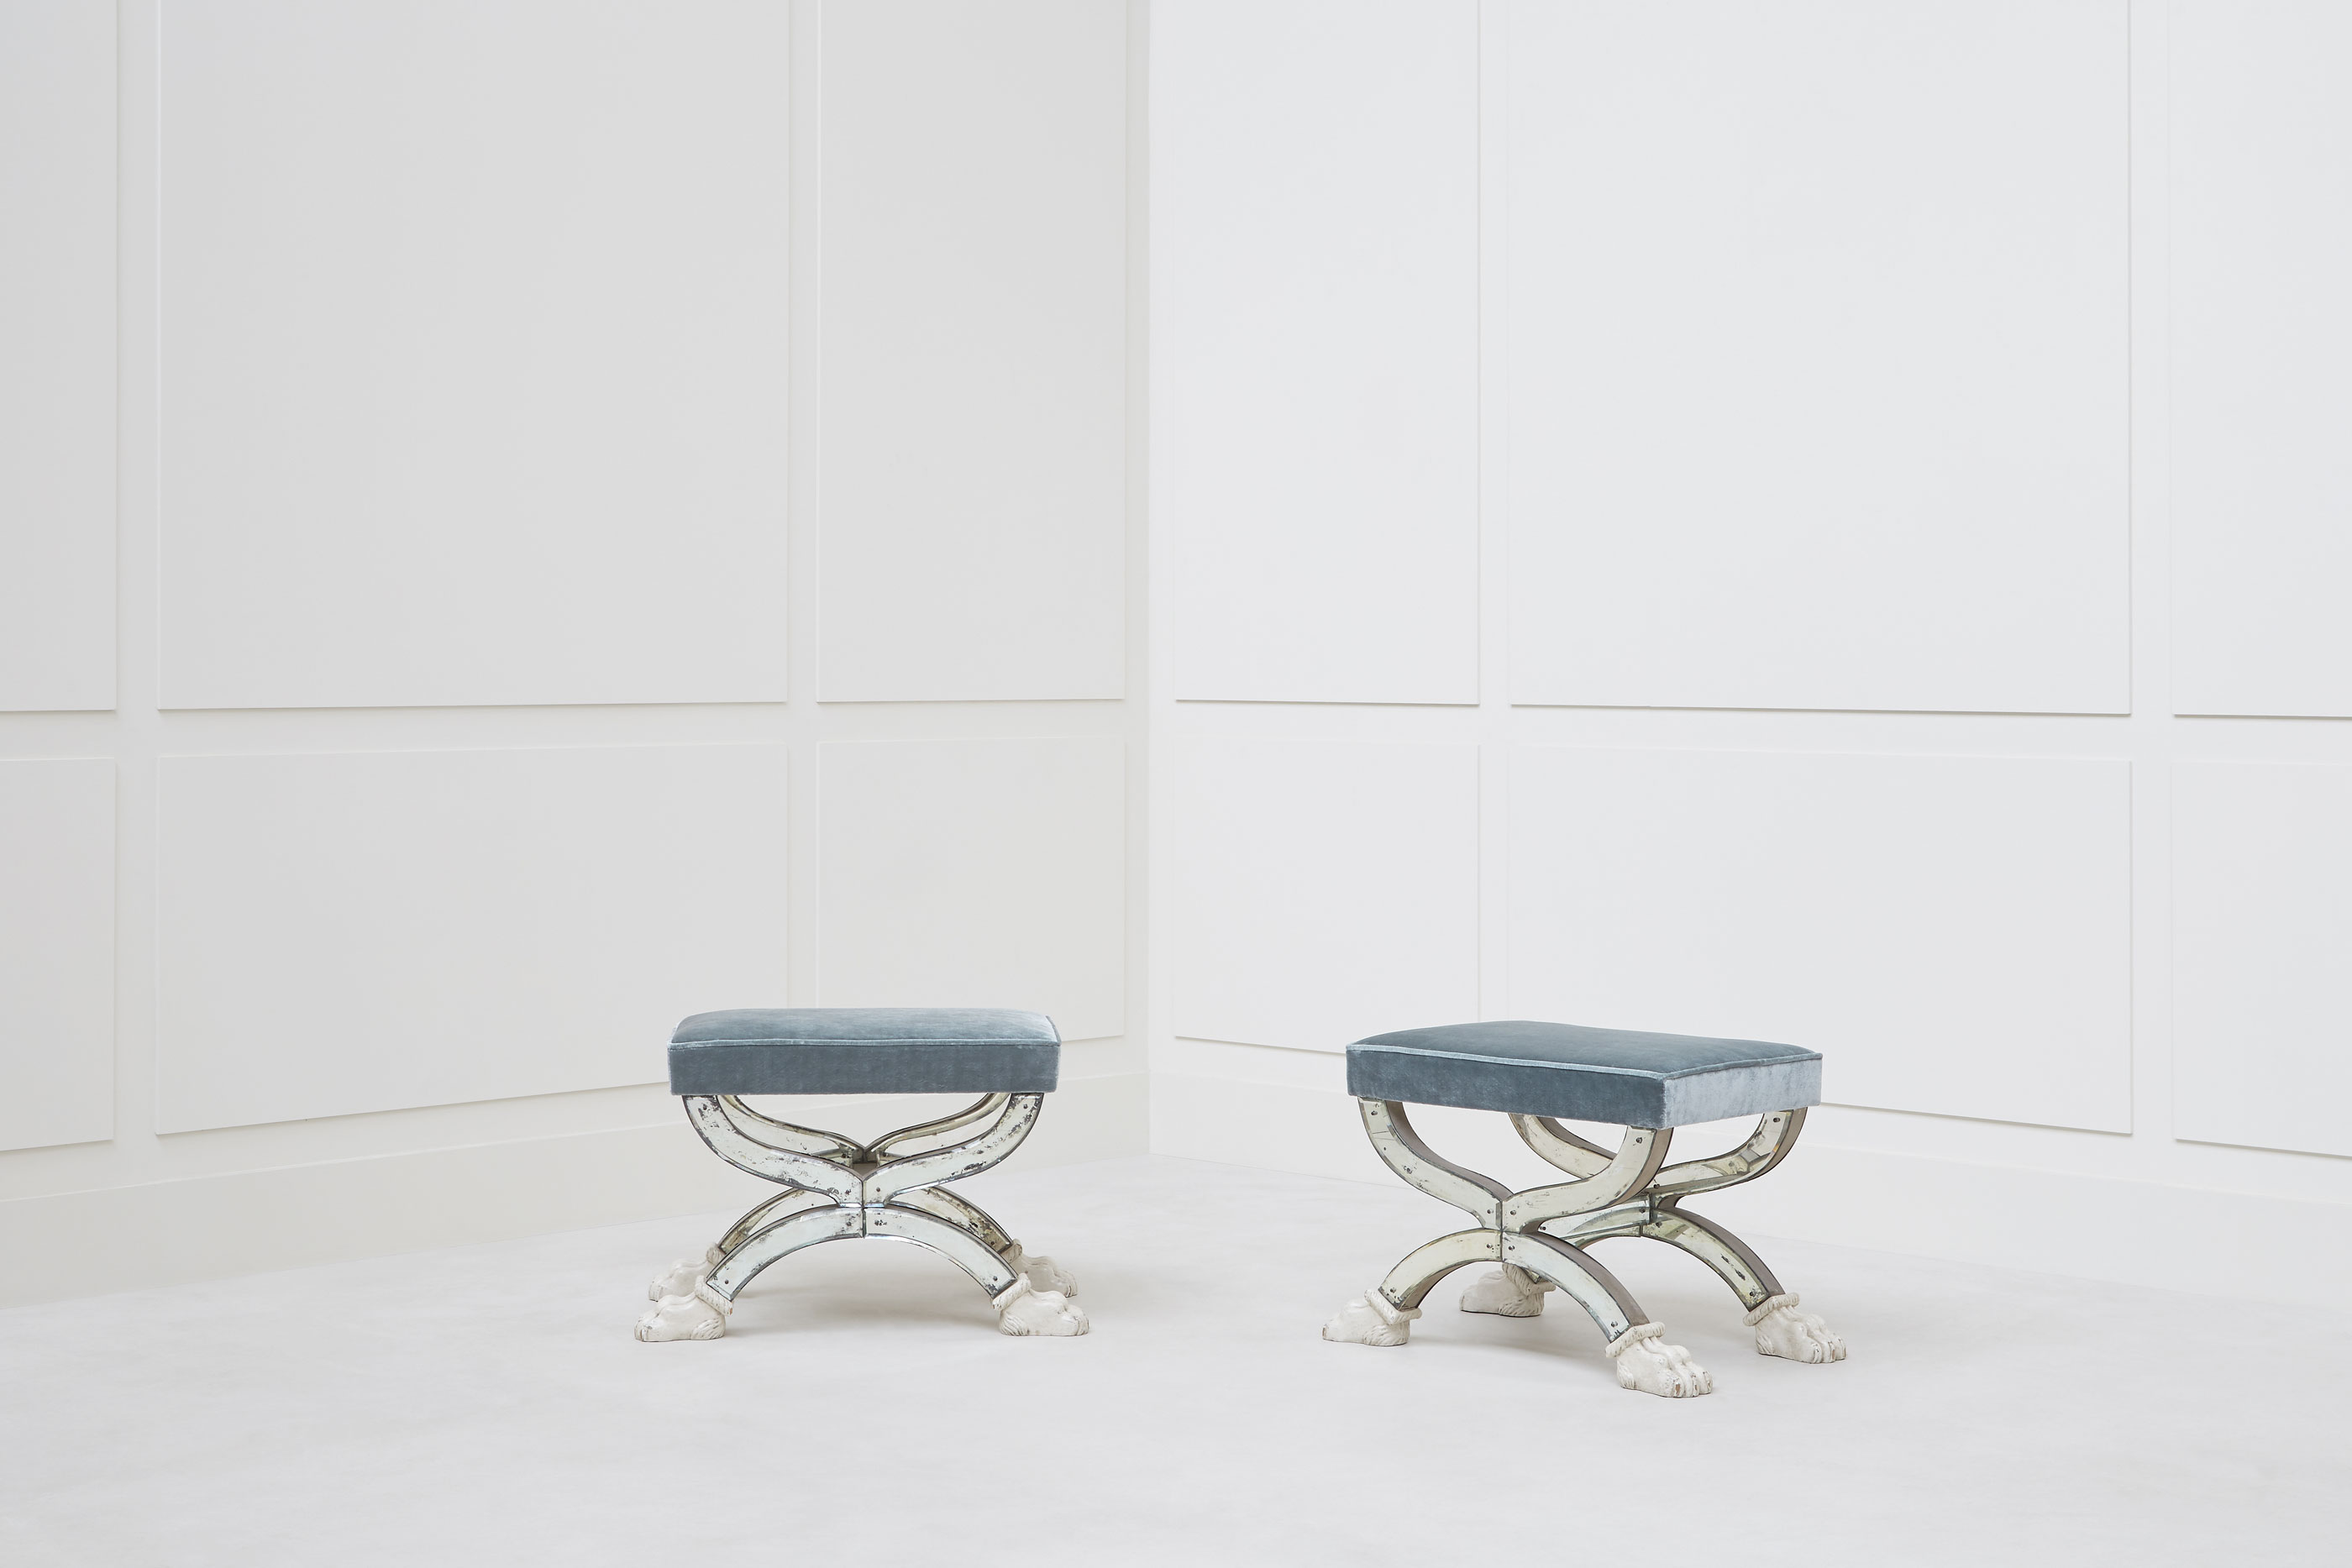 Serge Roche, Pair of stools, vue 01